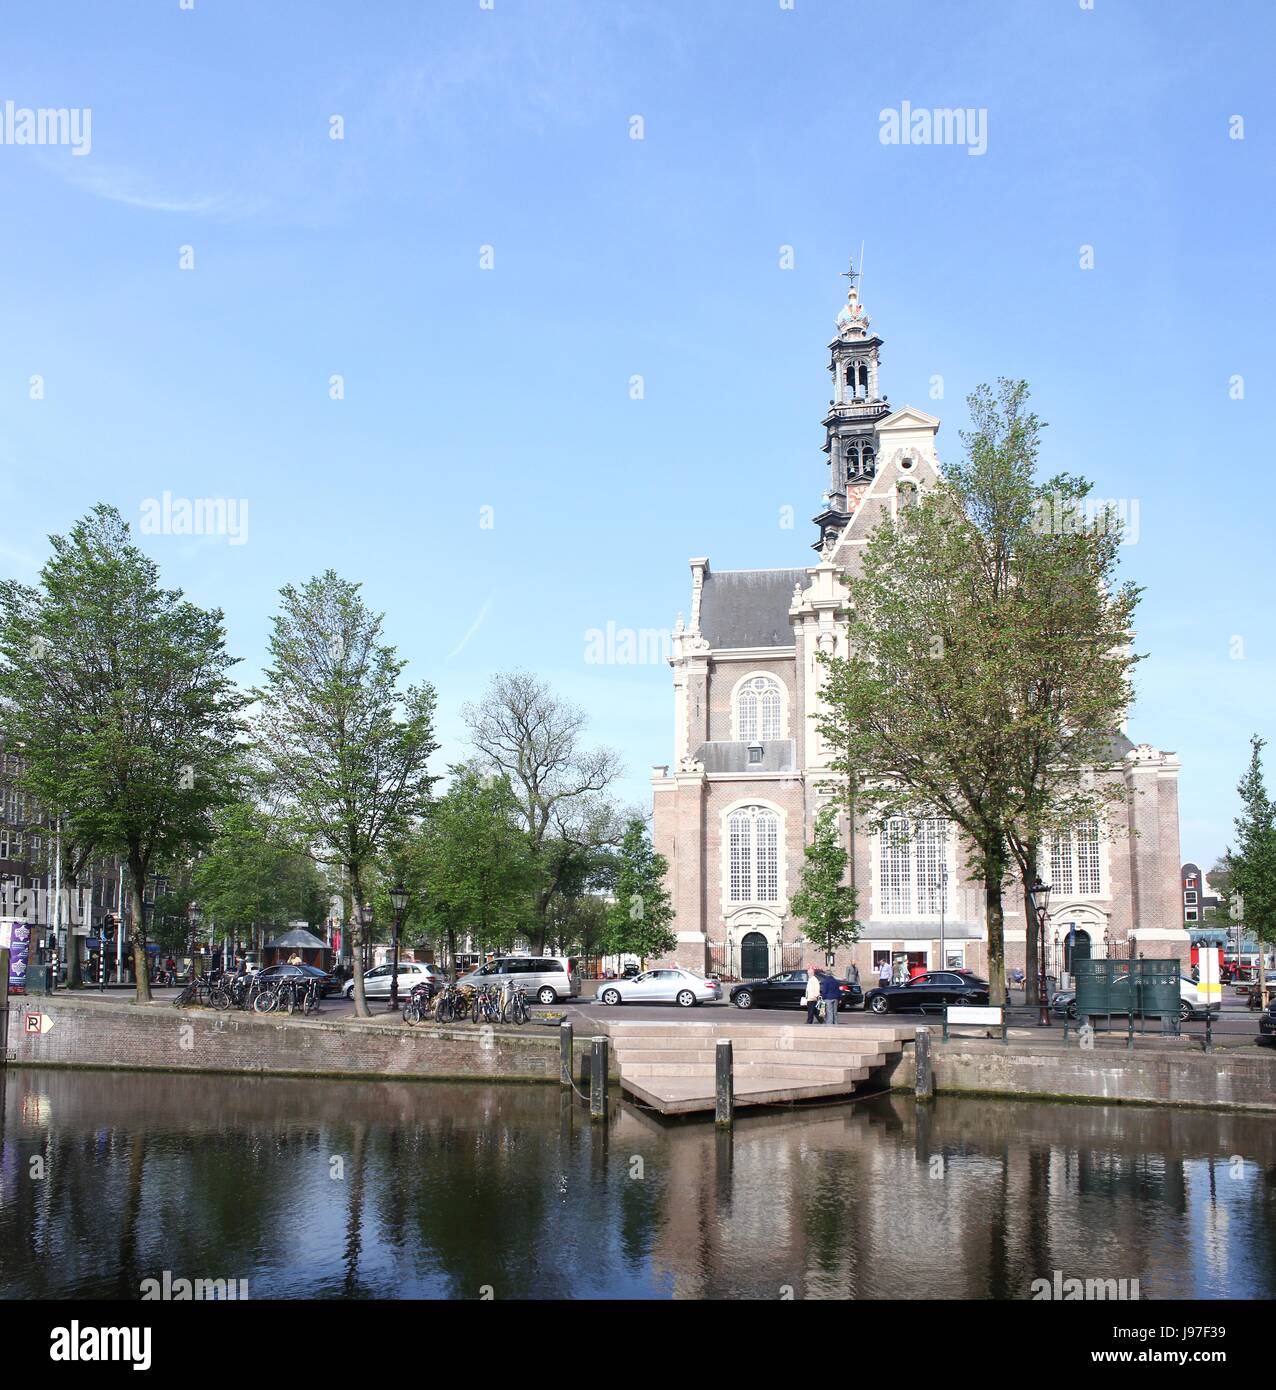 17th century Westerkerk, Protestant church, Amsterdam Jordaan district, Keizersgracht canal, Netherlands. Homo monument on the canal bank in front. Stock Photo